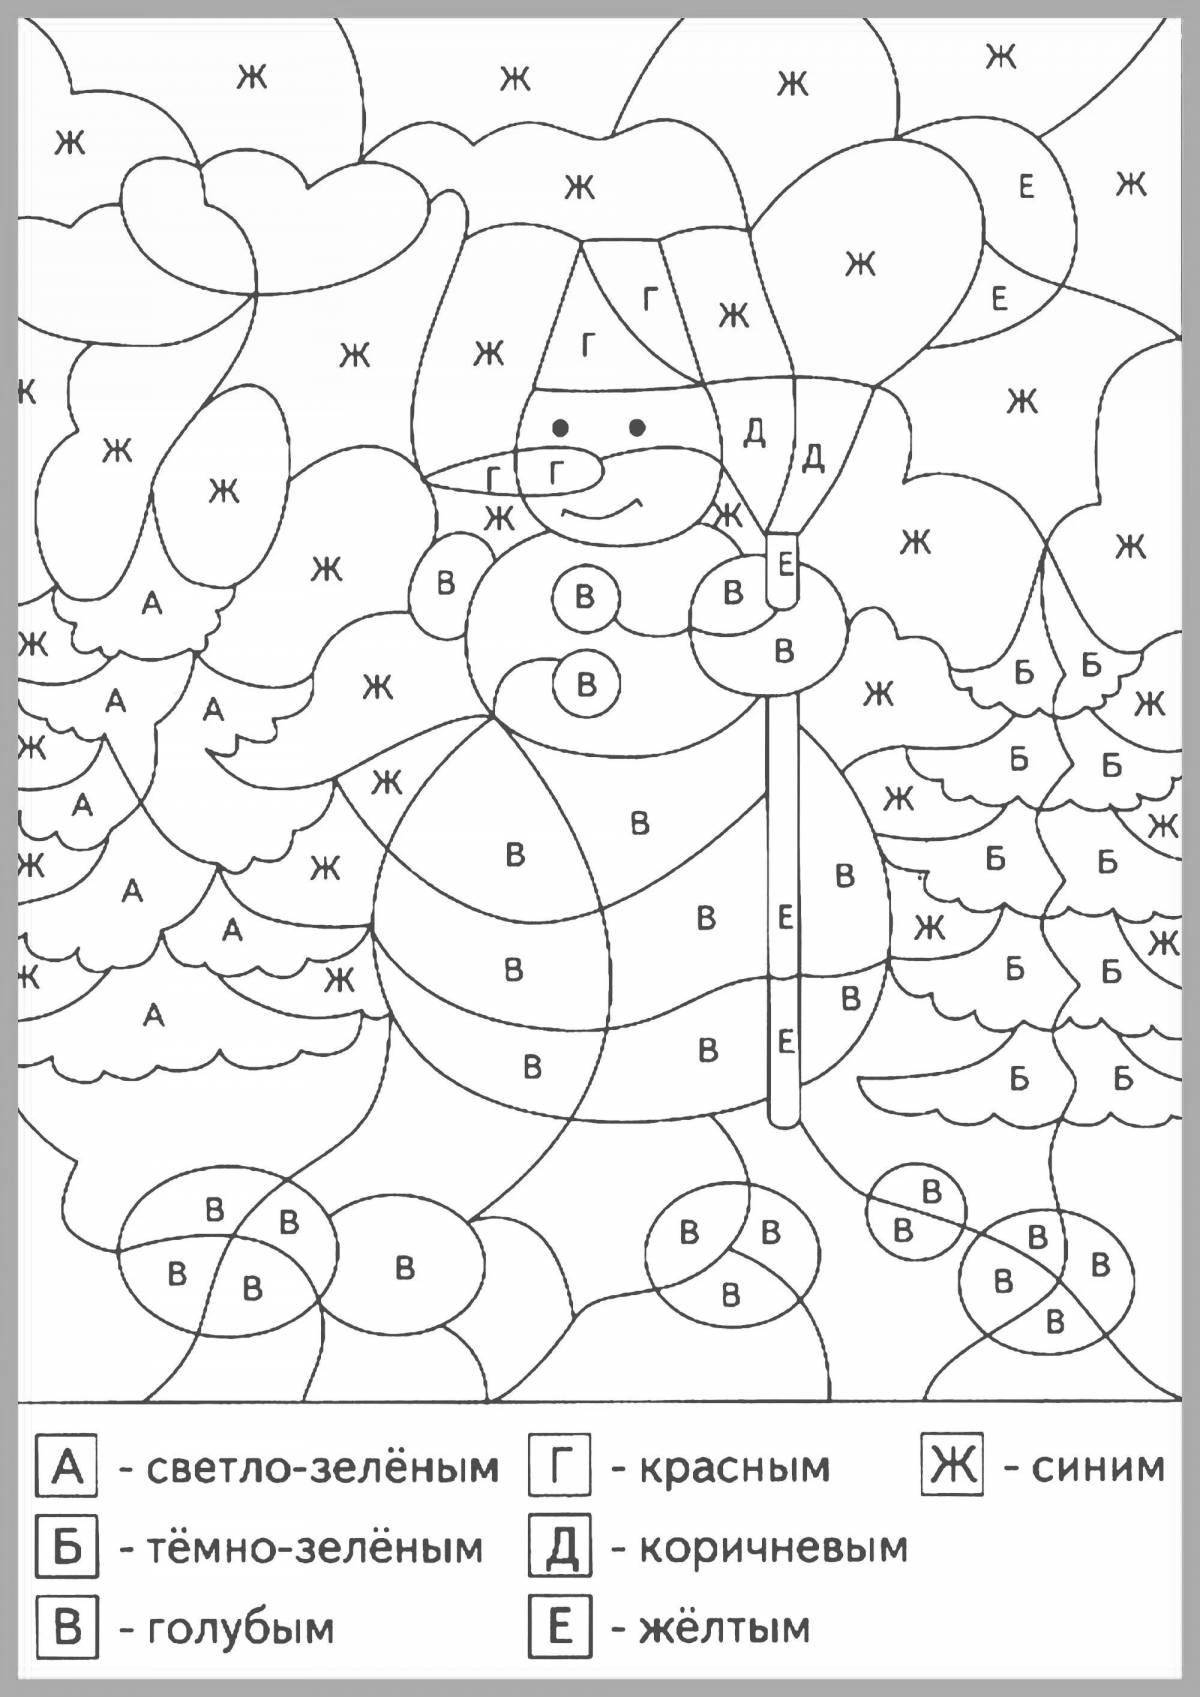 Exquisite snowman coloring by numbers